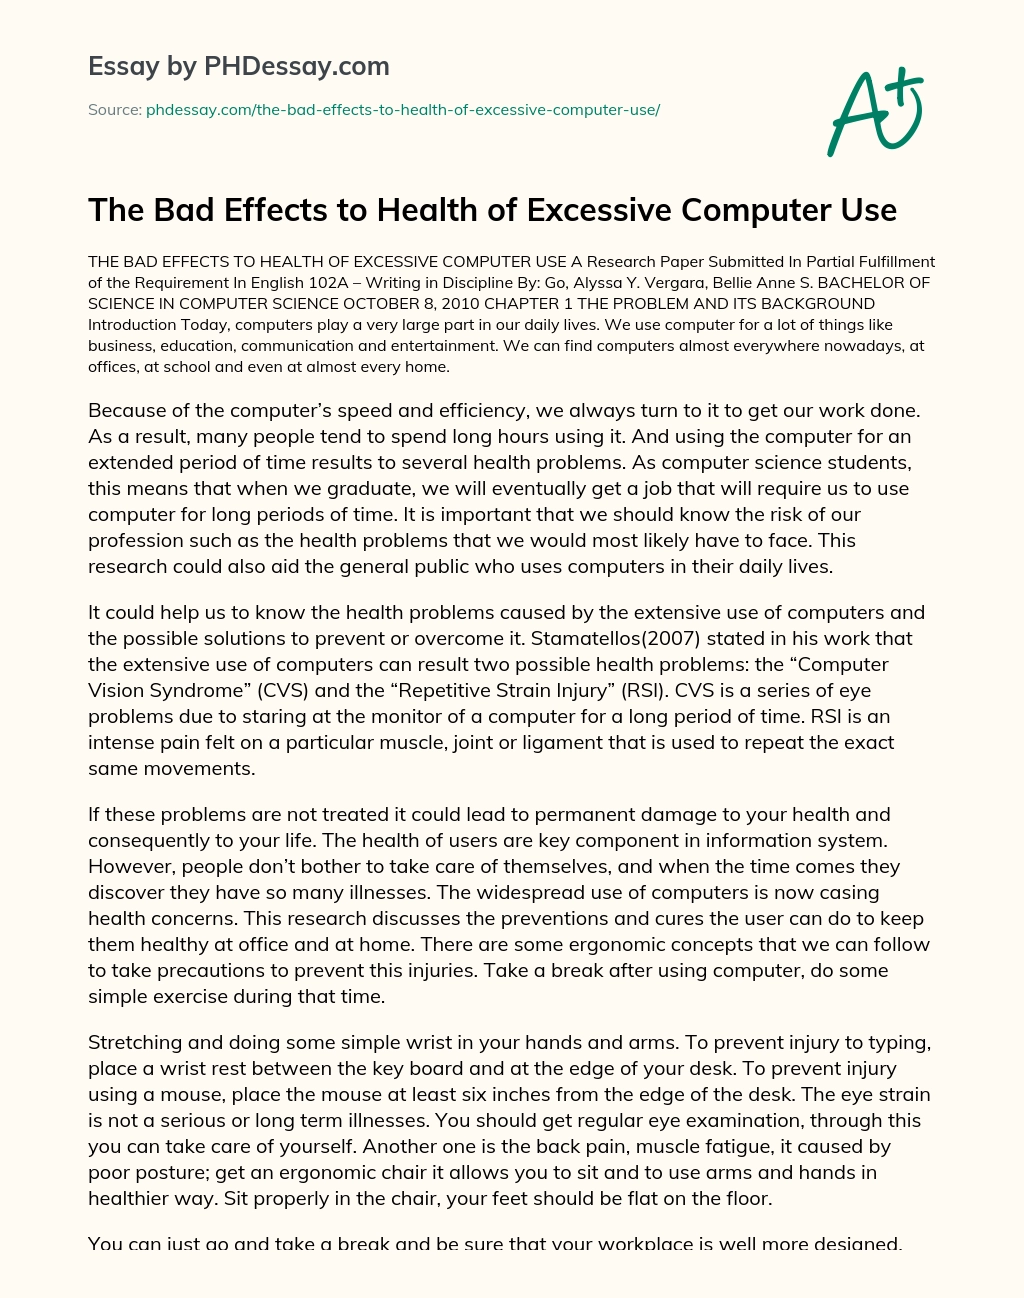 The Bad Effects to Health of Excessive Computer Use essay